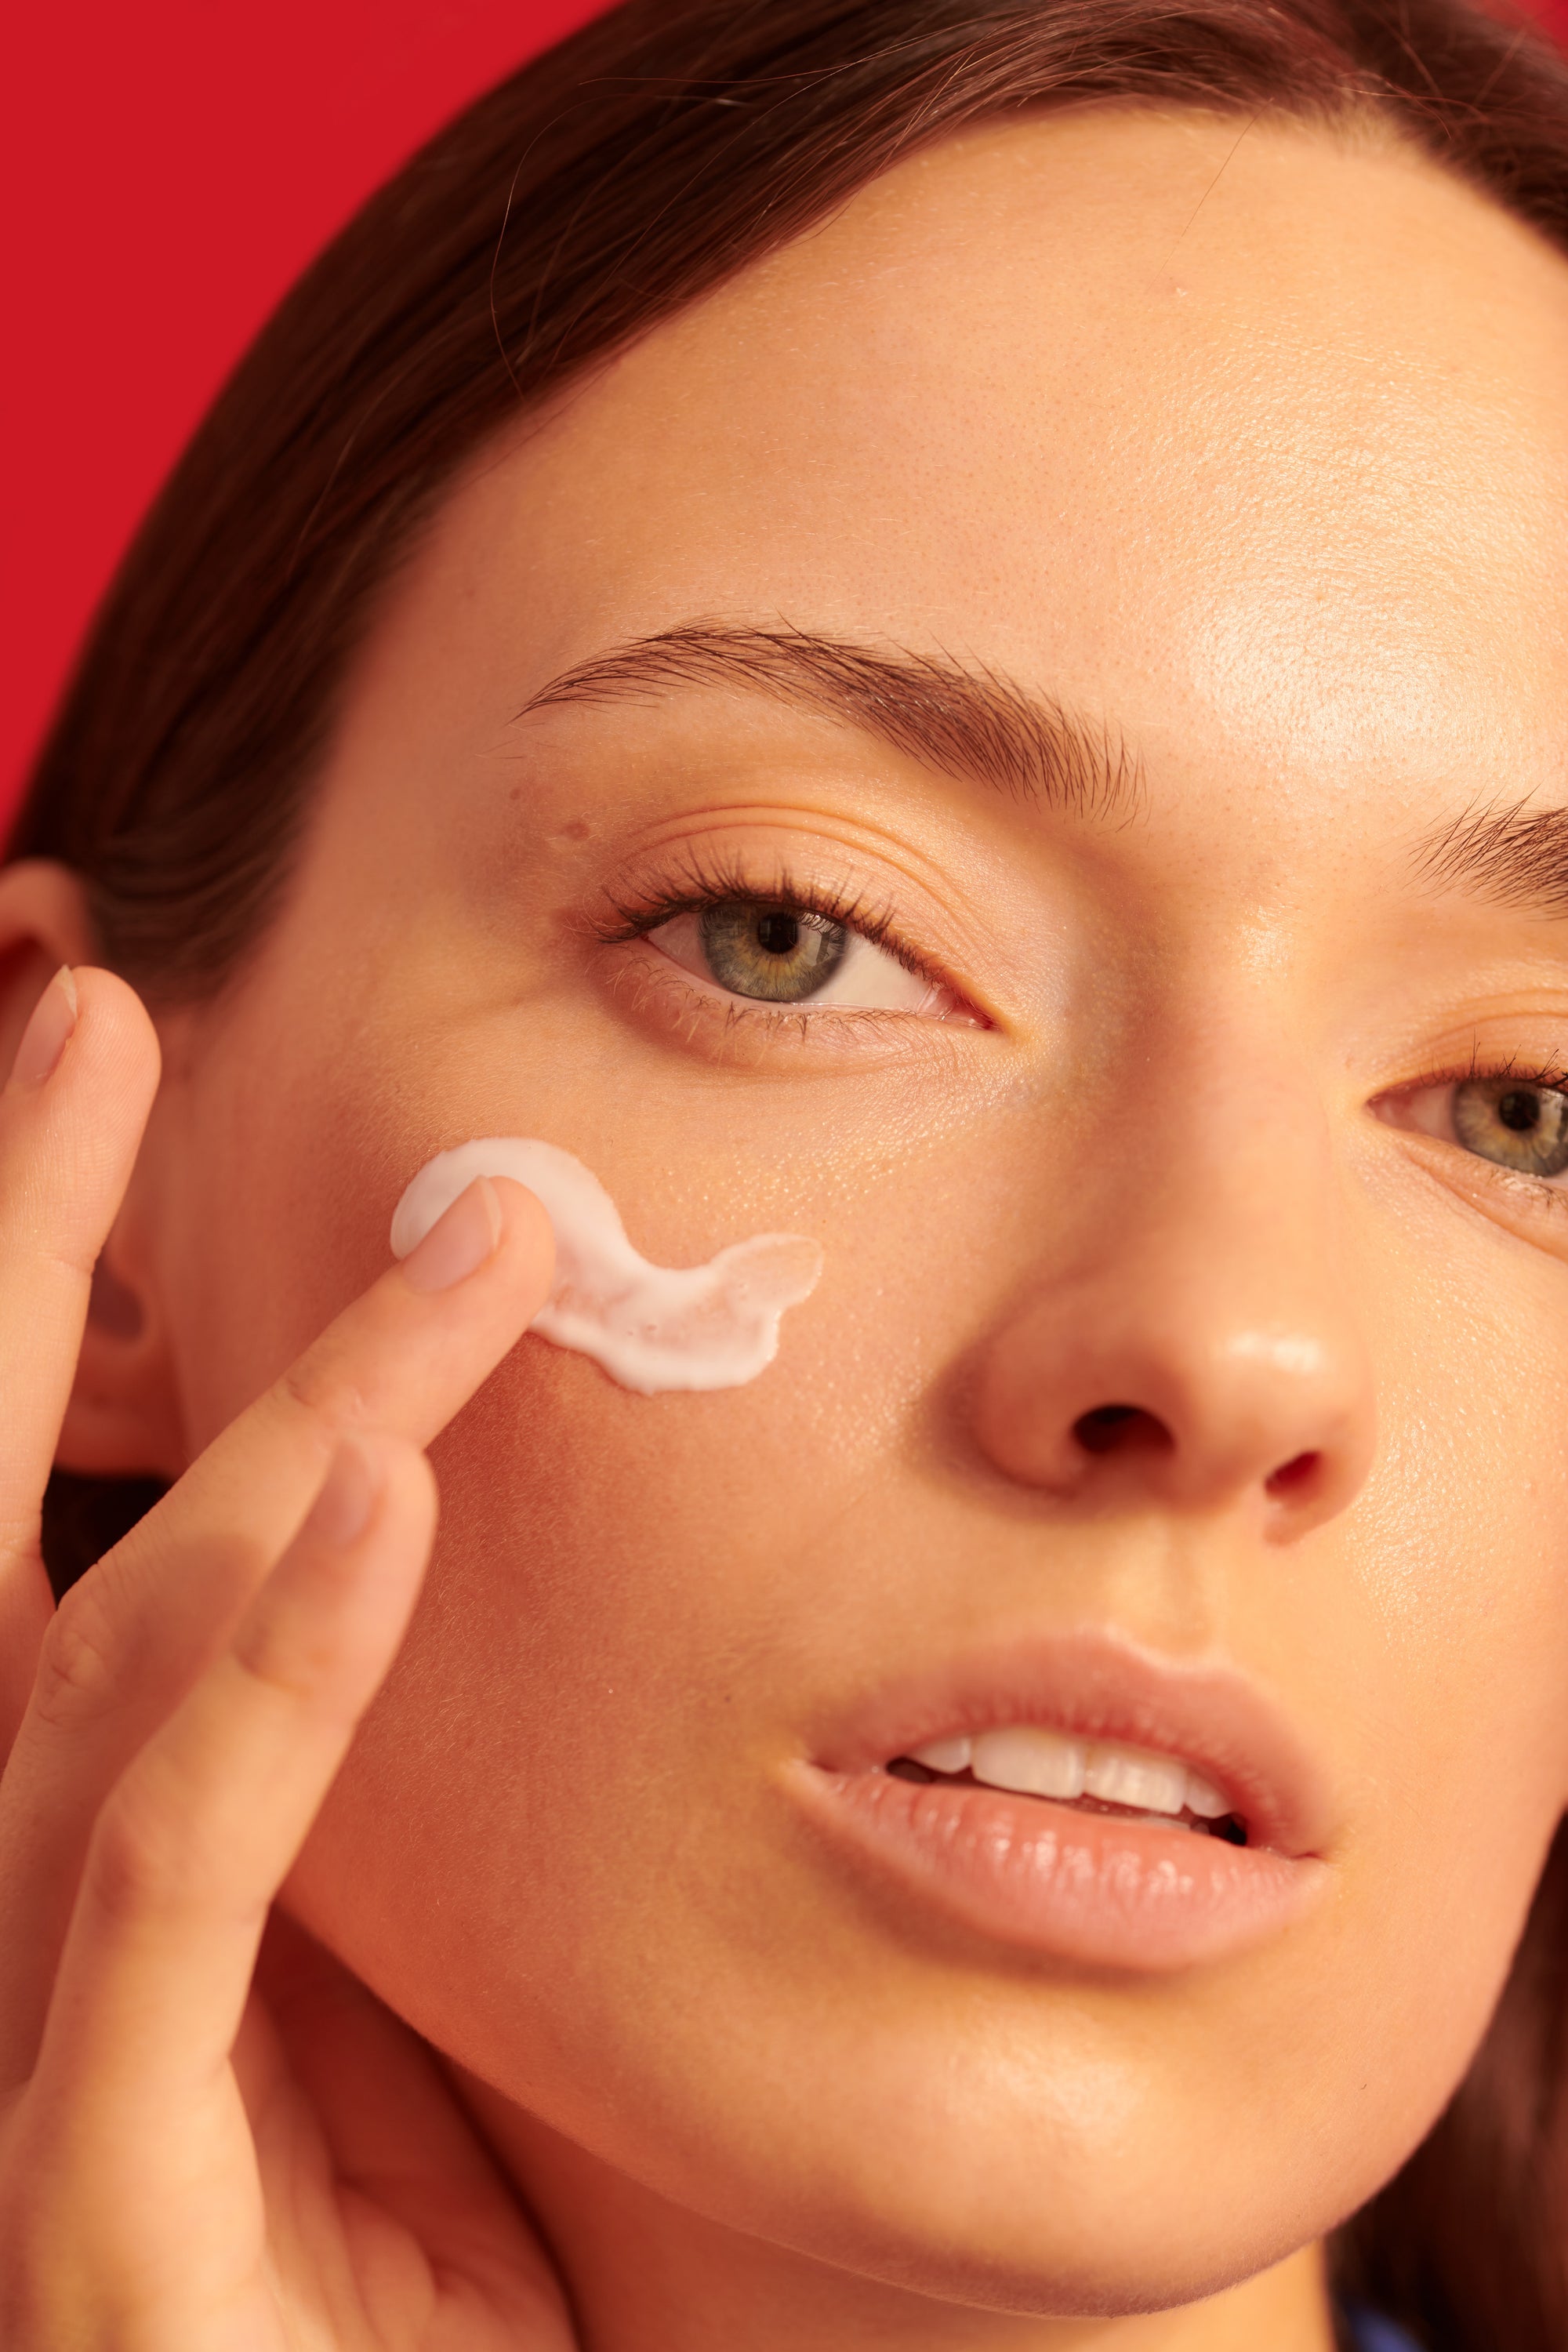 Sensitive Skin Uncovered: Symptoms, Causes, Products to Use